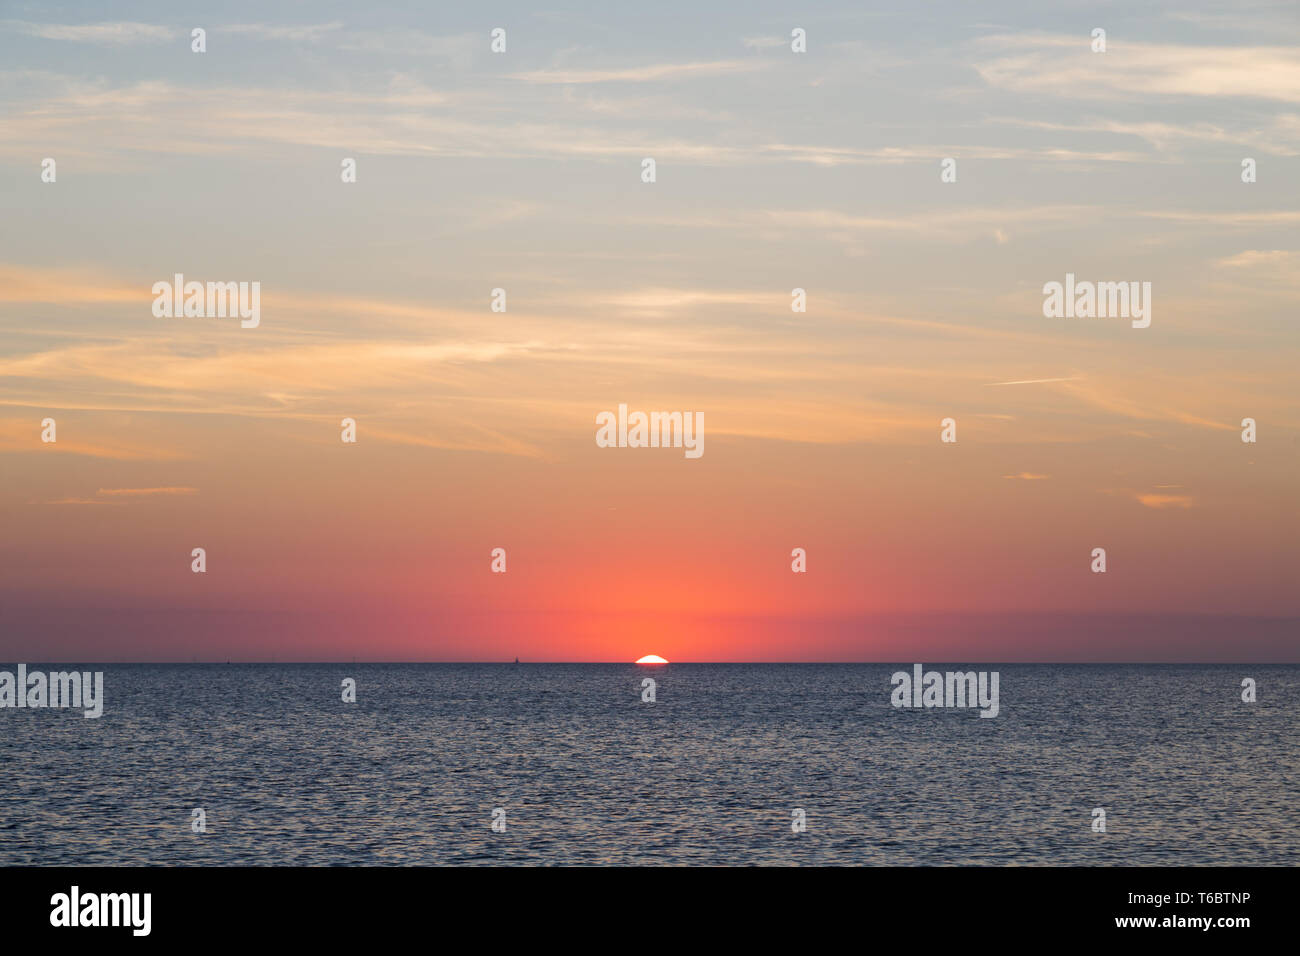 blurred sunset over the ocean for backgrounds Stock Photo